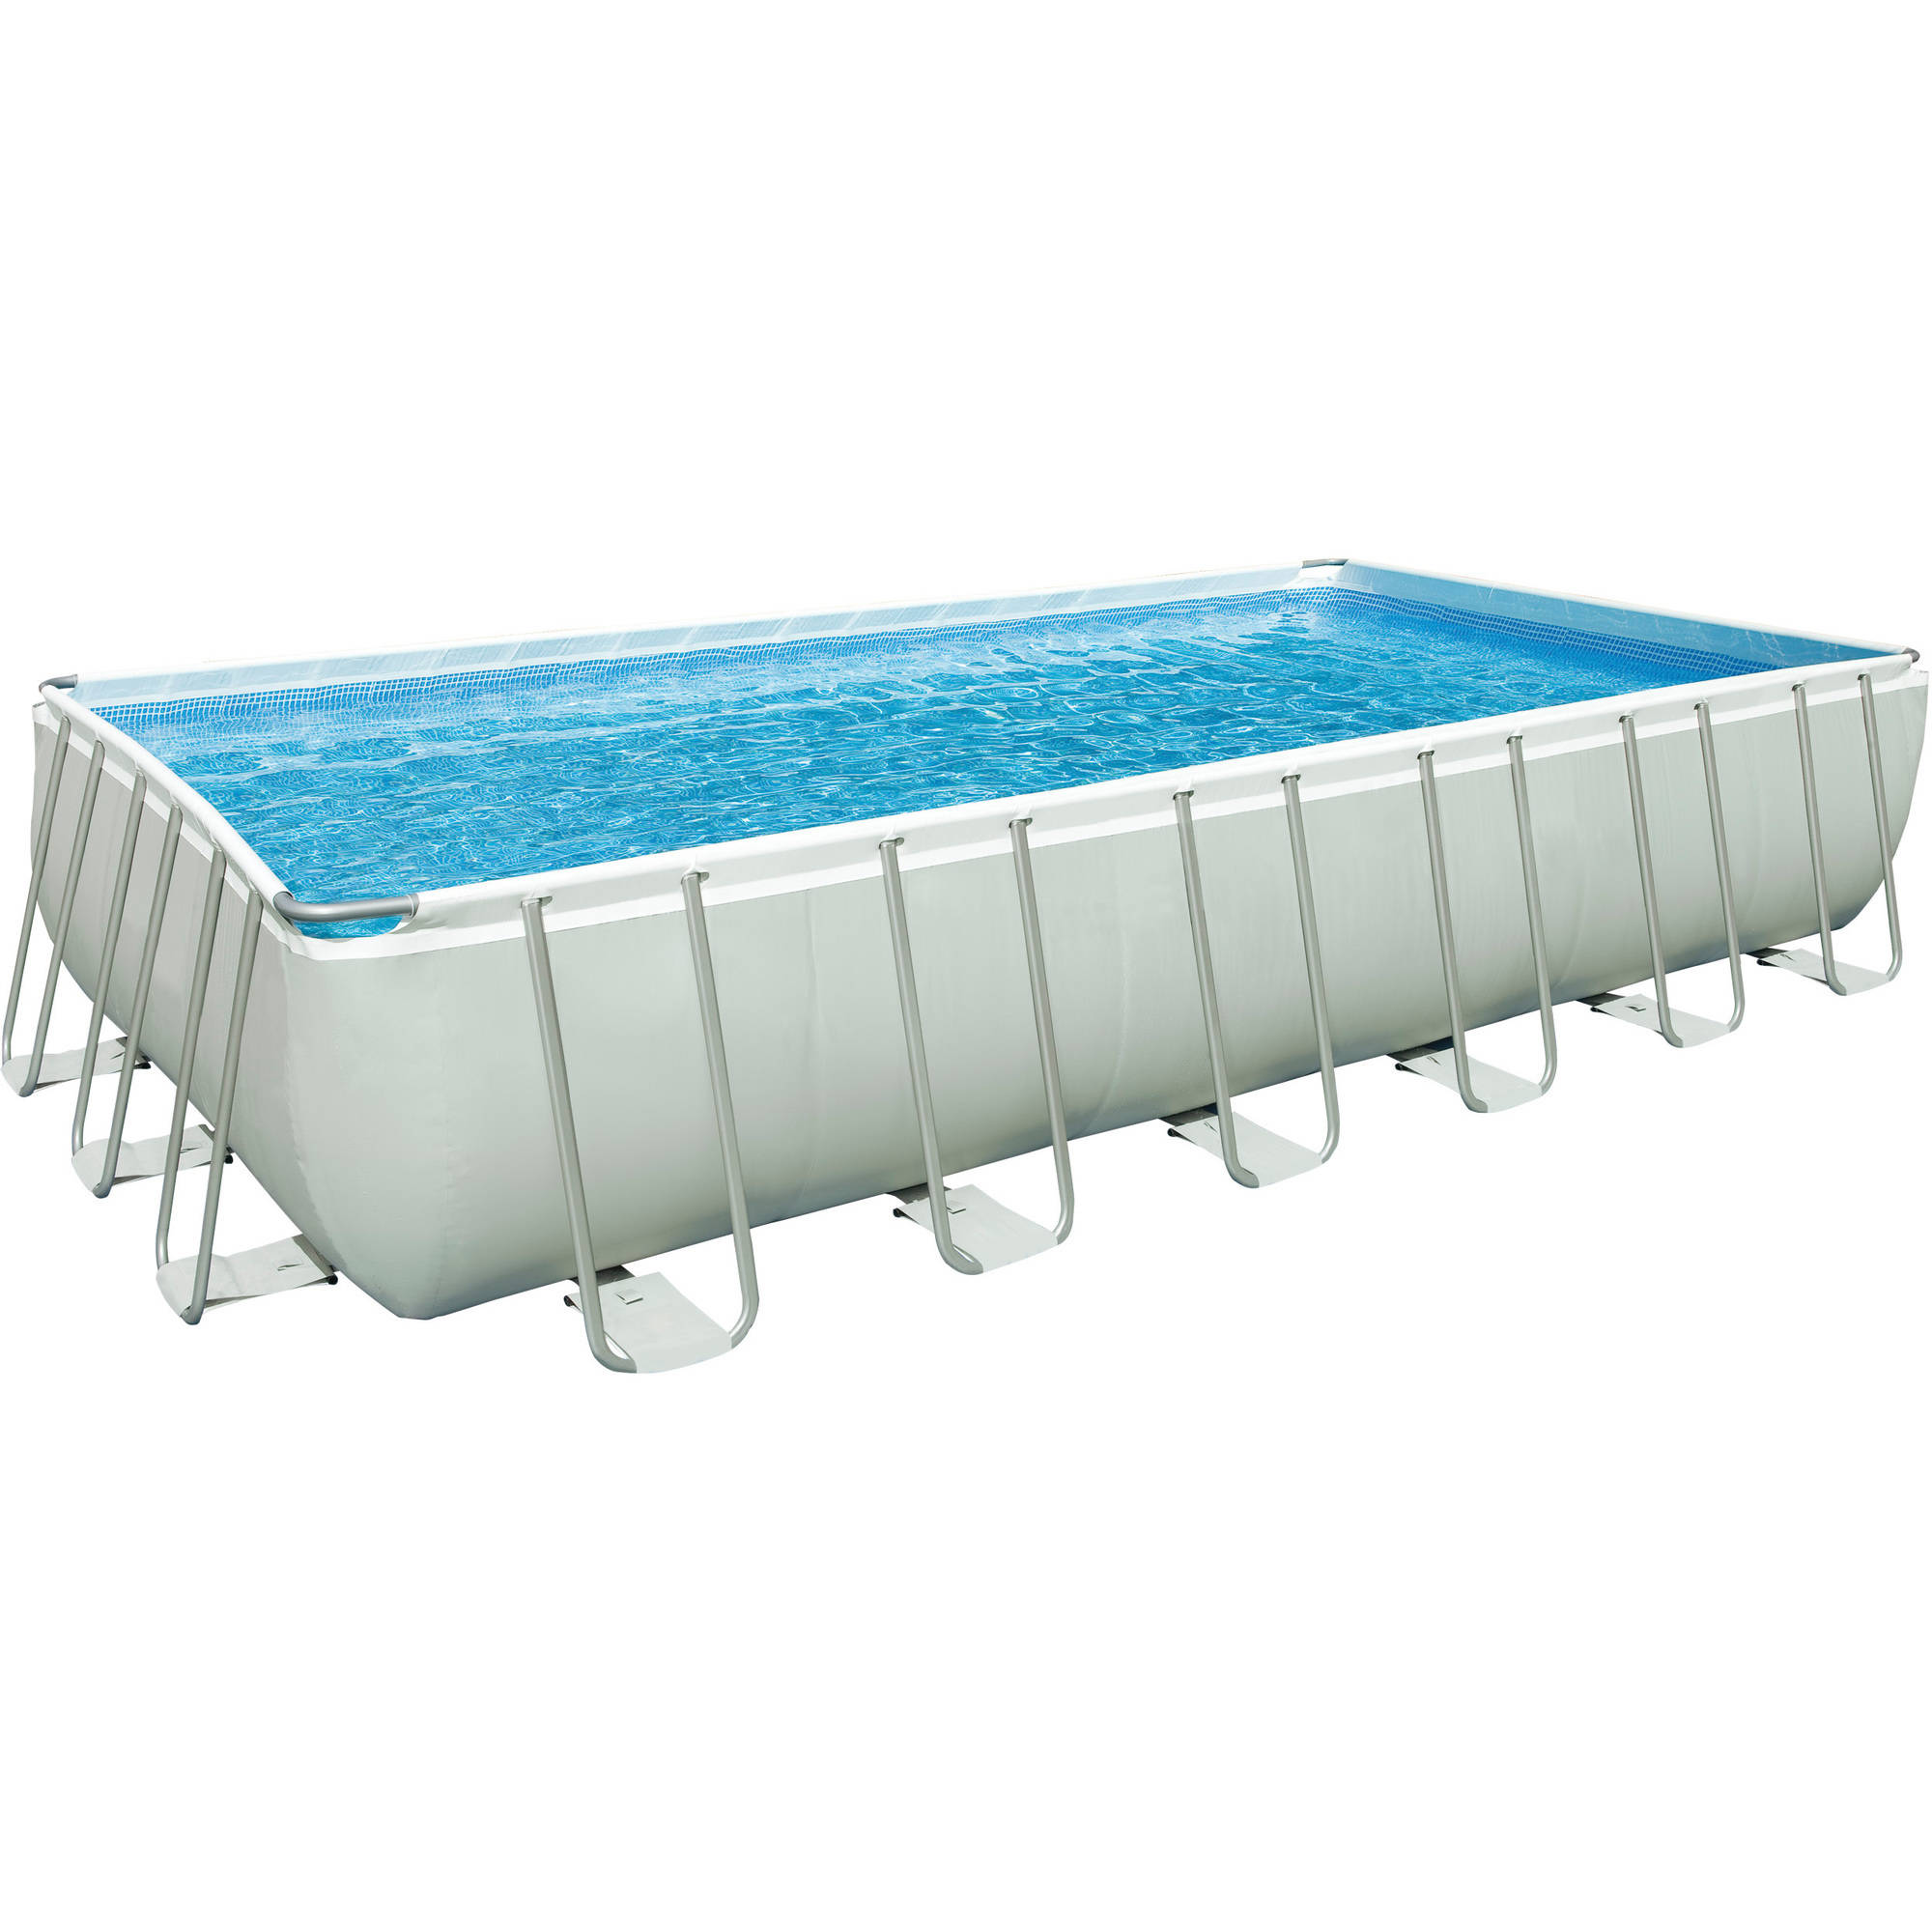 Intex 24' x 12' x 52" Ultra Frame Rectangular Above Ground Swimming Pool with Sand Filter Pump - image 1 of 6